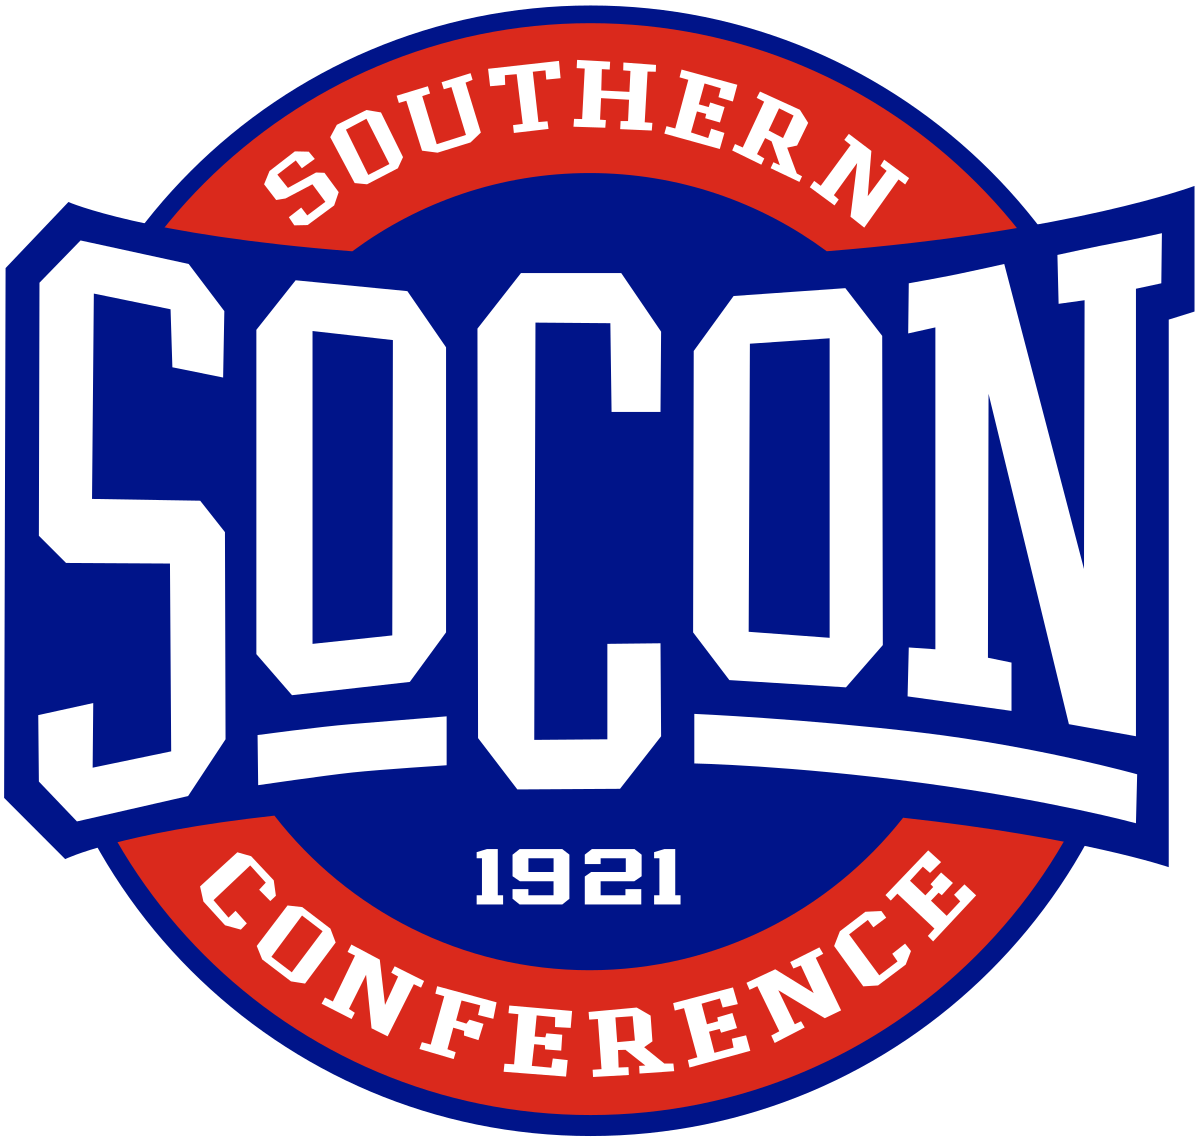 Southern Conference - Wikipedia